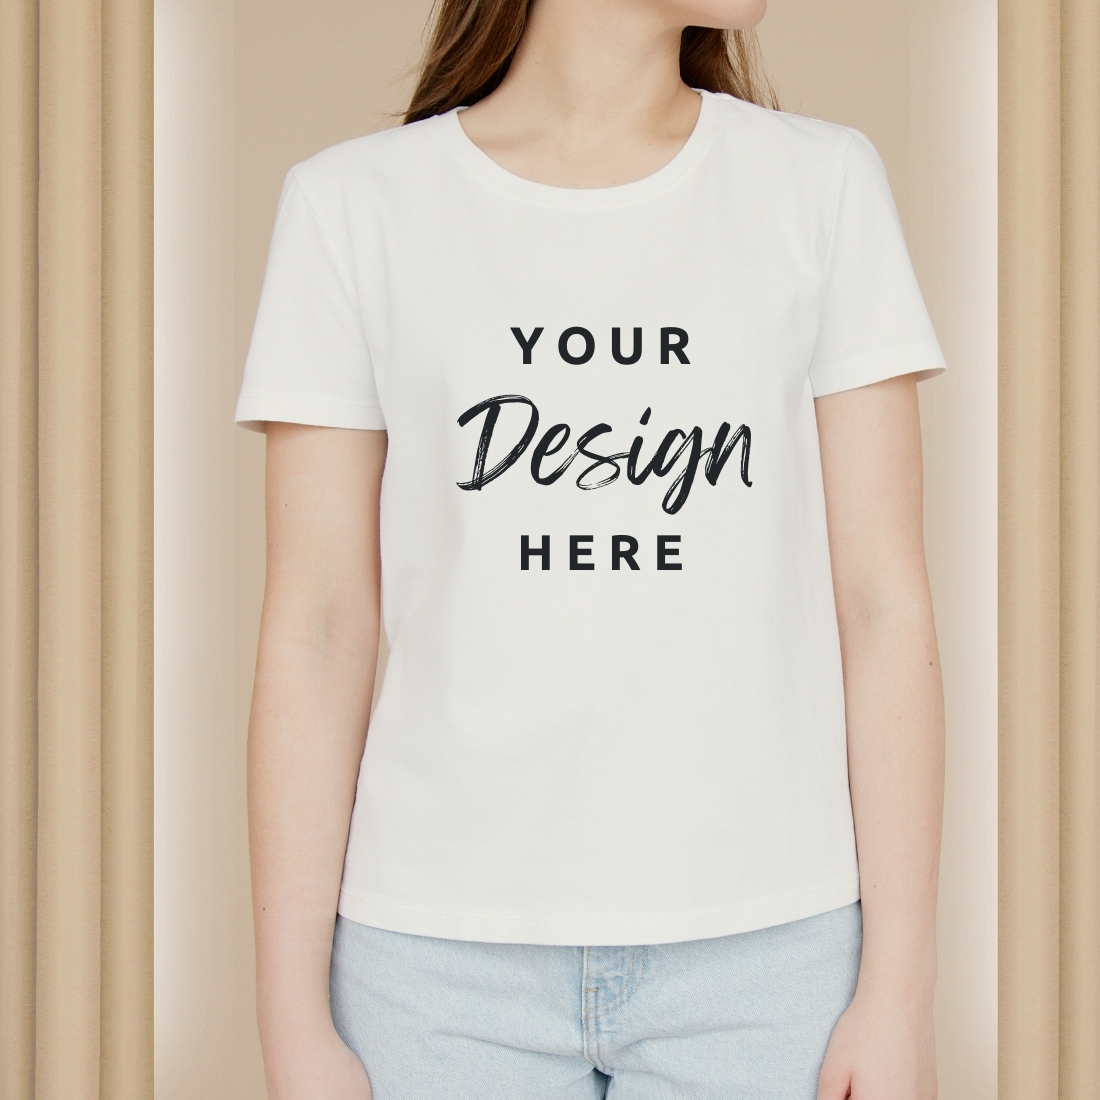 White T-Shirt Mockup | White T-Shirt Designs | Real Model Mock | Simple Aesthetic Cozy White Canvas Shirt cover image.